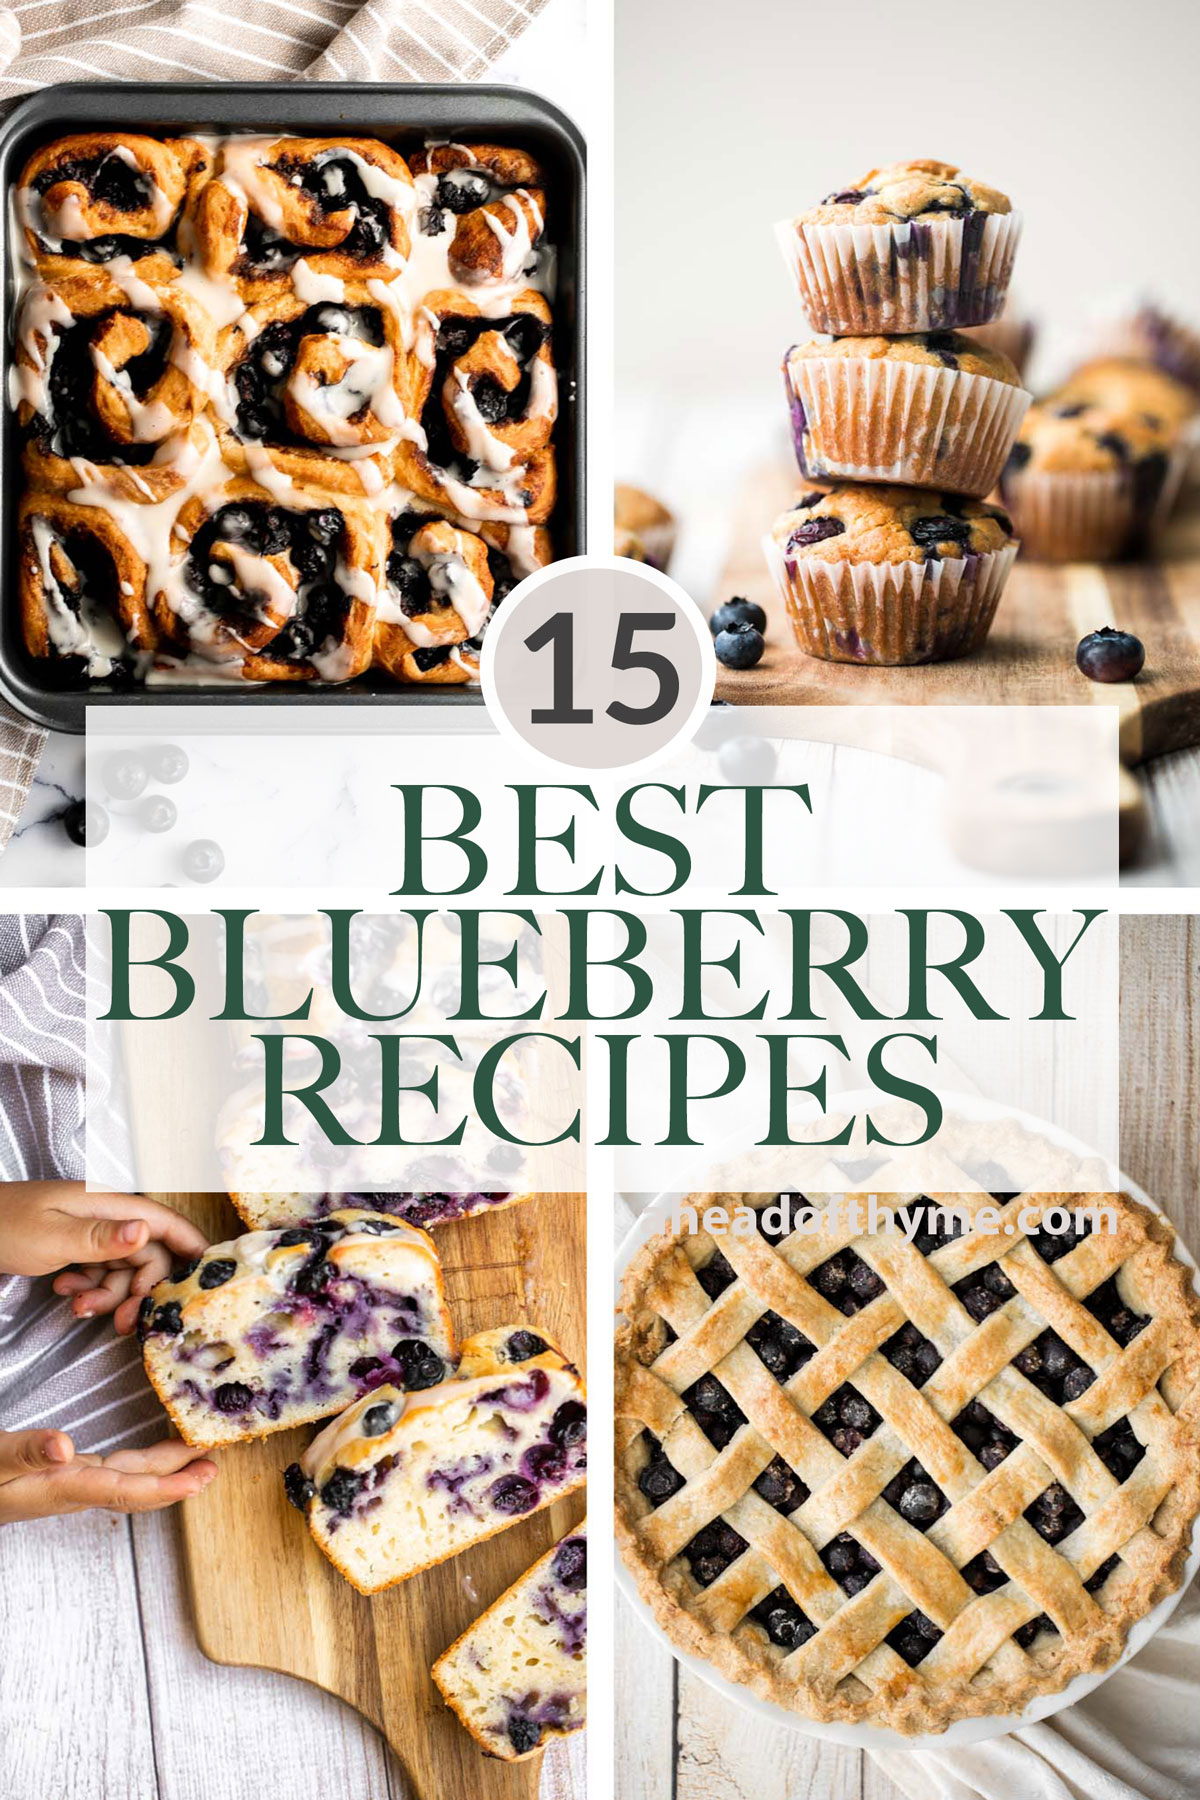 15 Best Blueberry Recipes